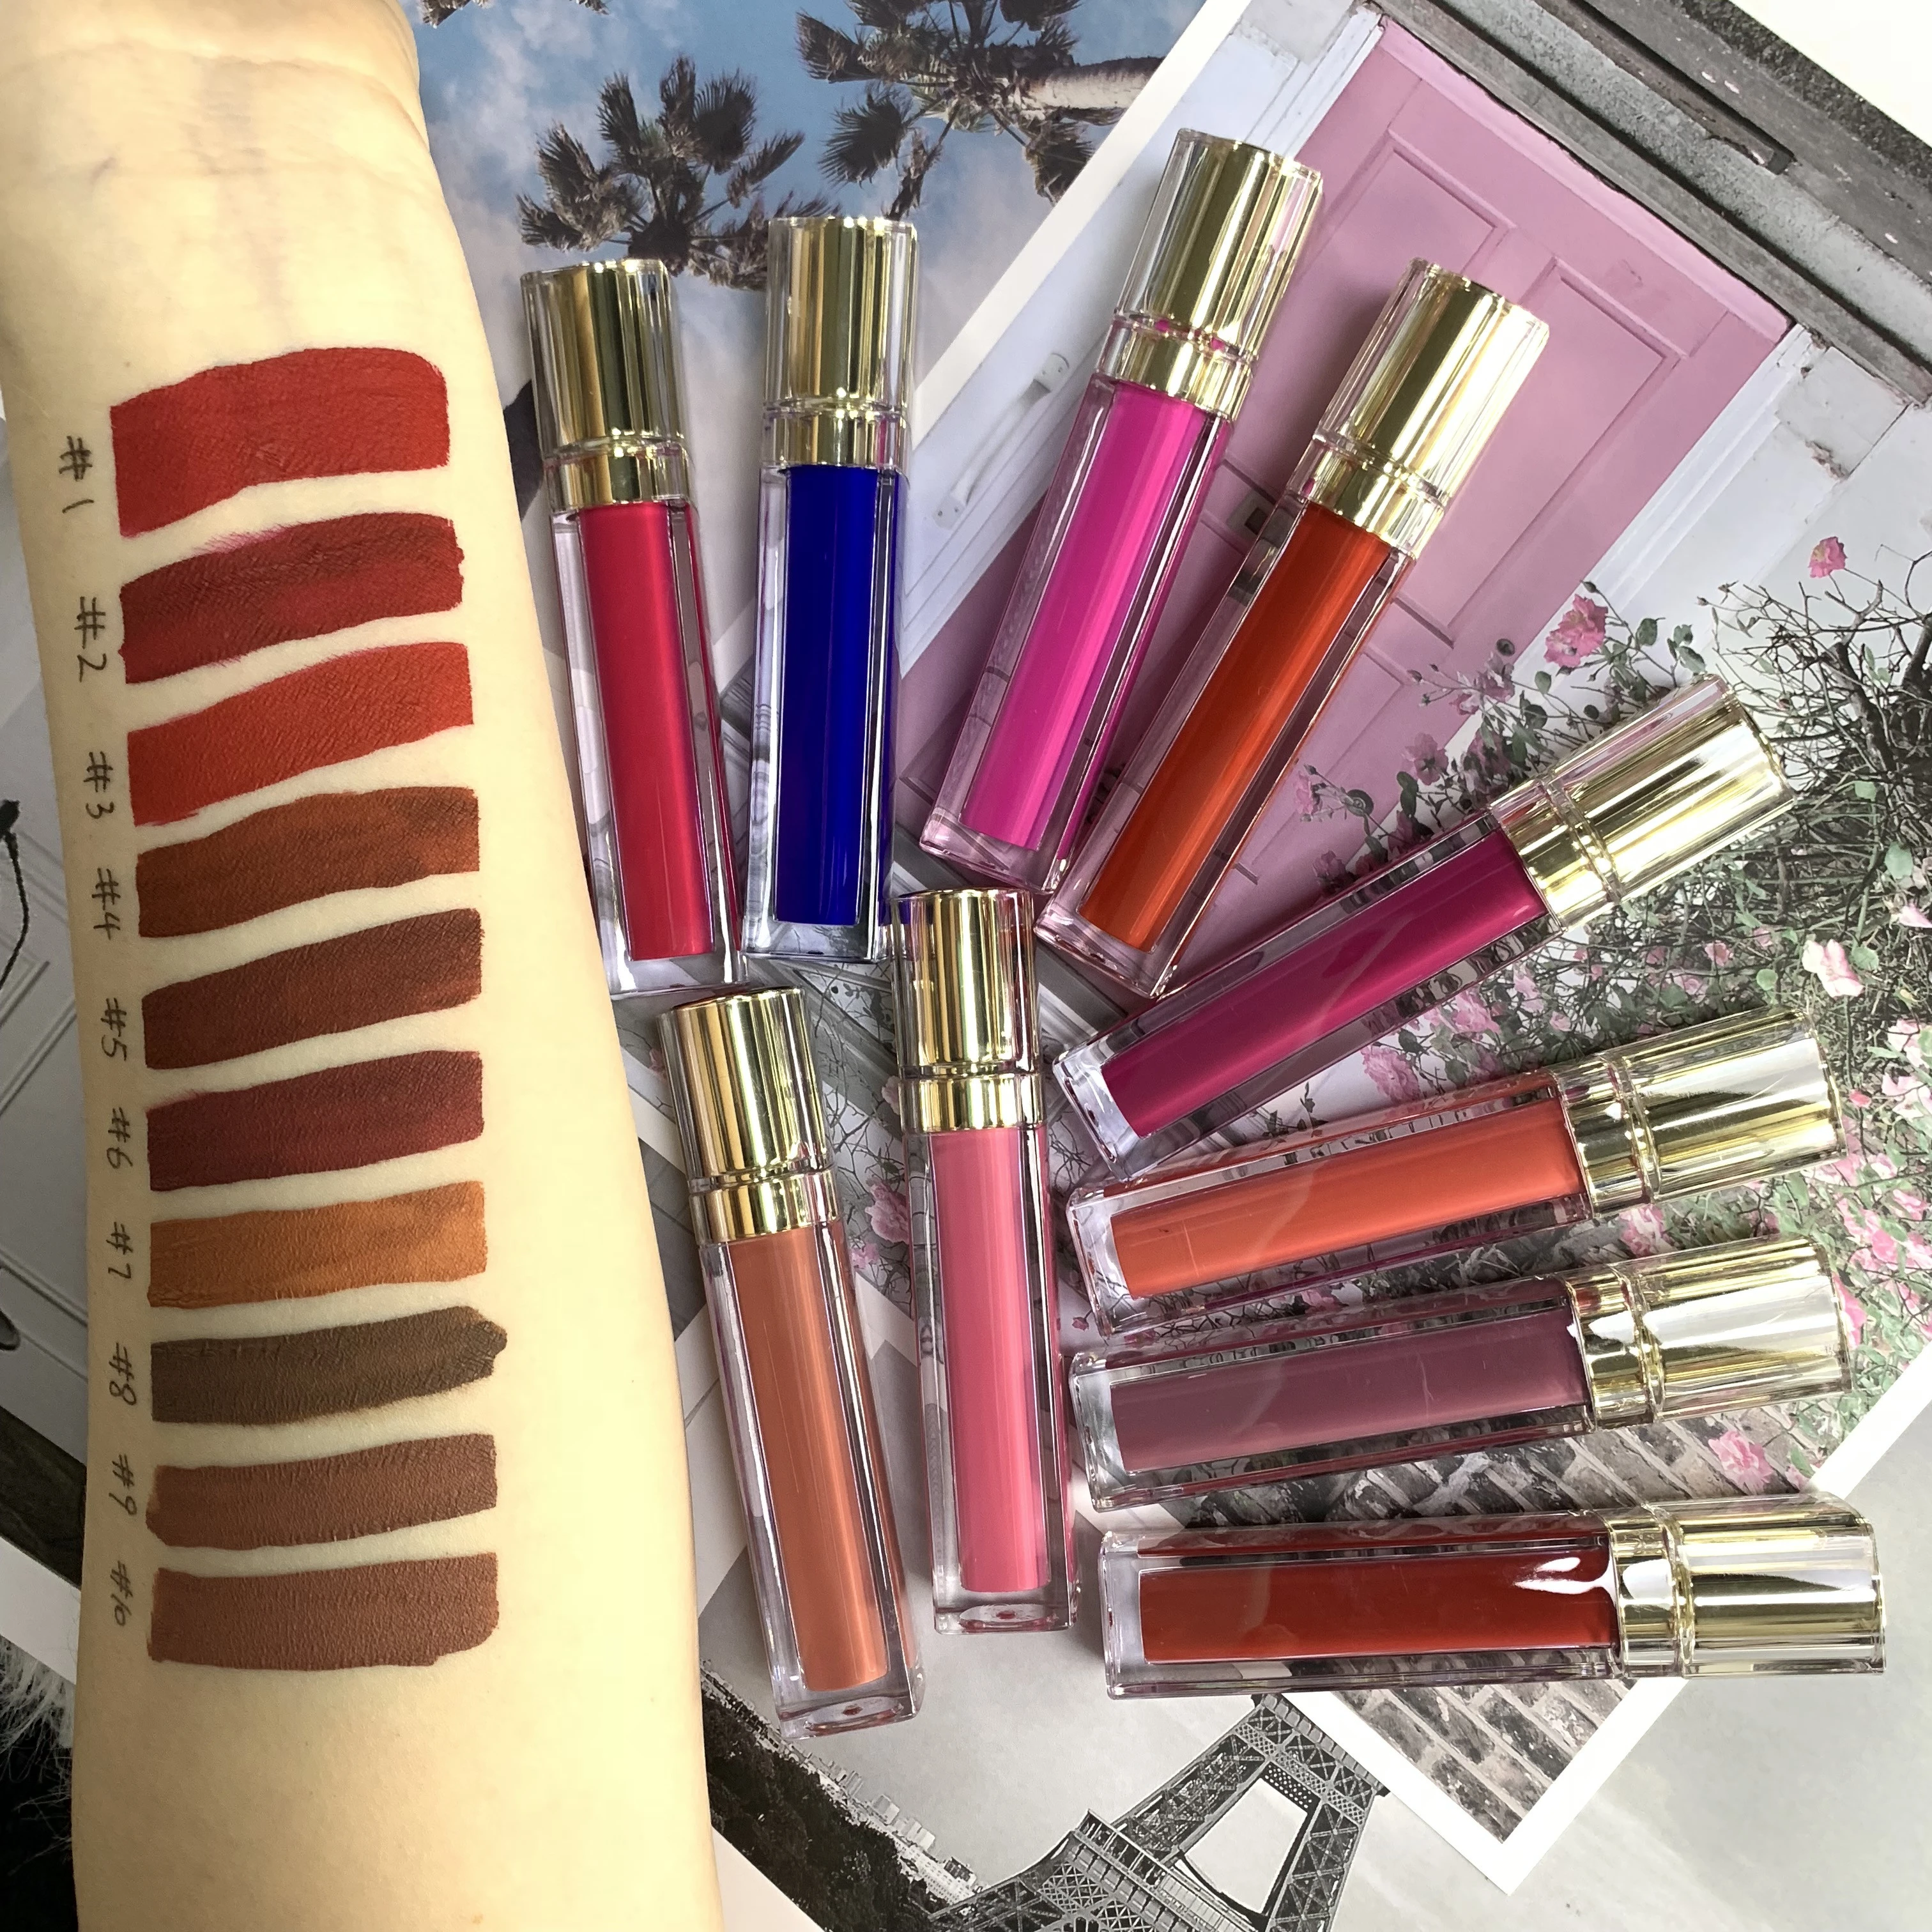 Customized Your Colors and Make Your Brand on the Lipgloss Liquid Lipstick Private Label Lip Gloss Drop Shipping Service